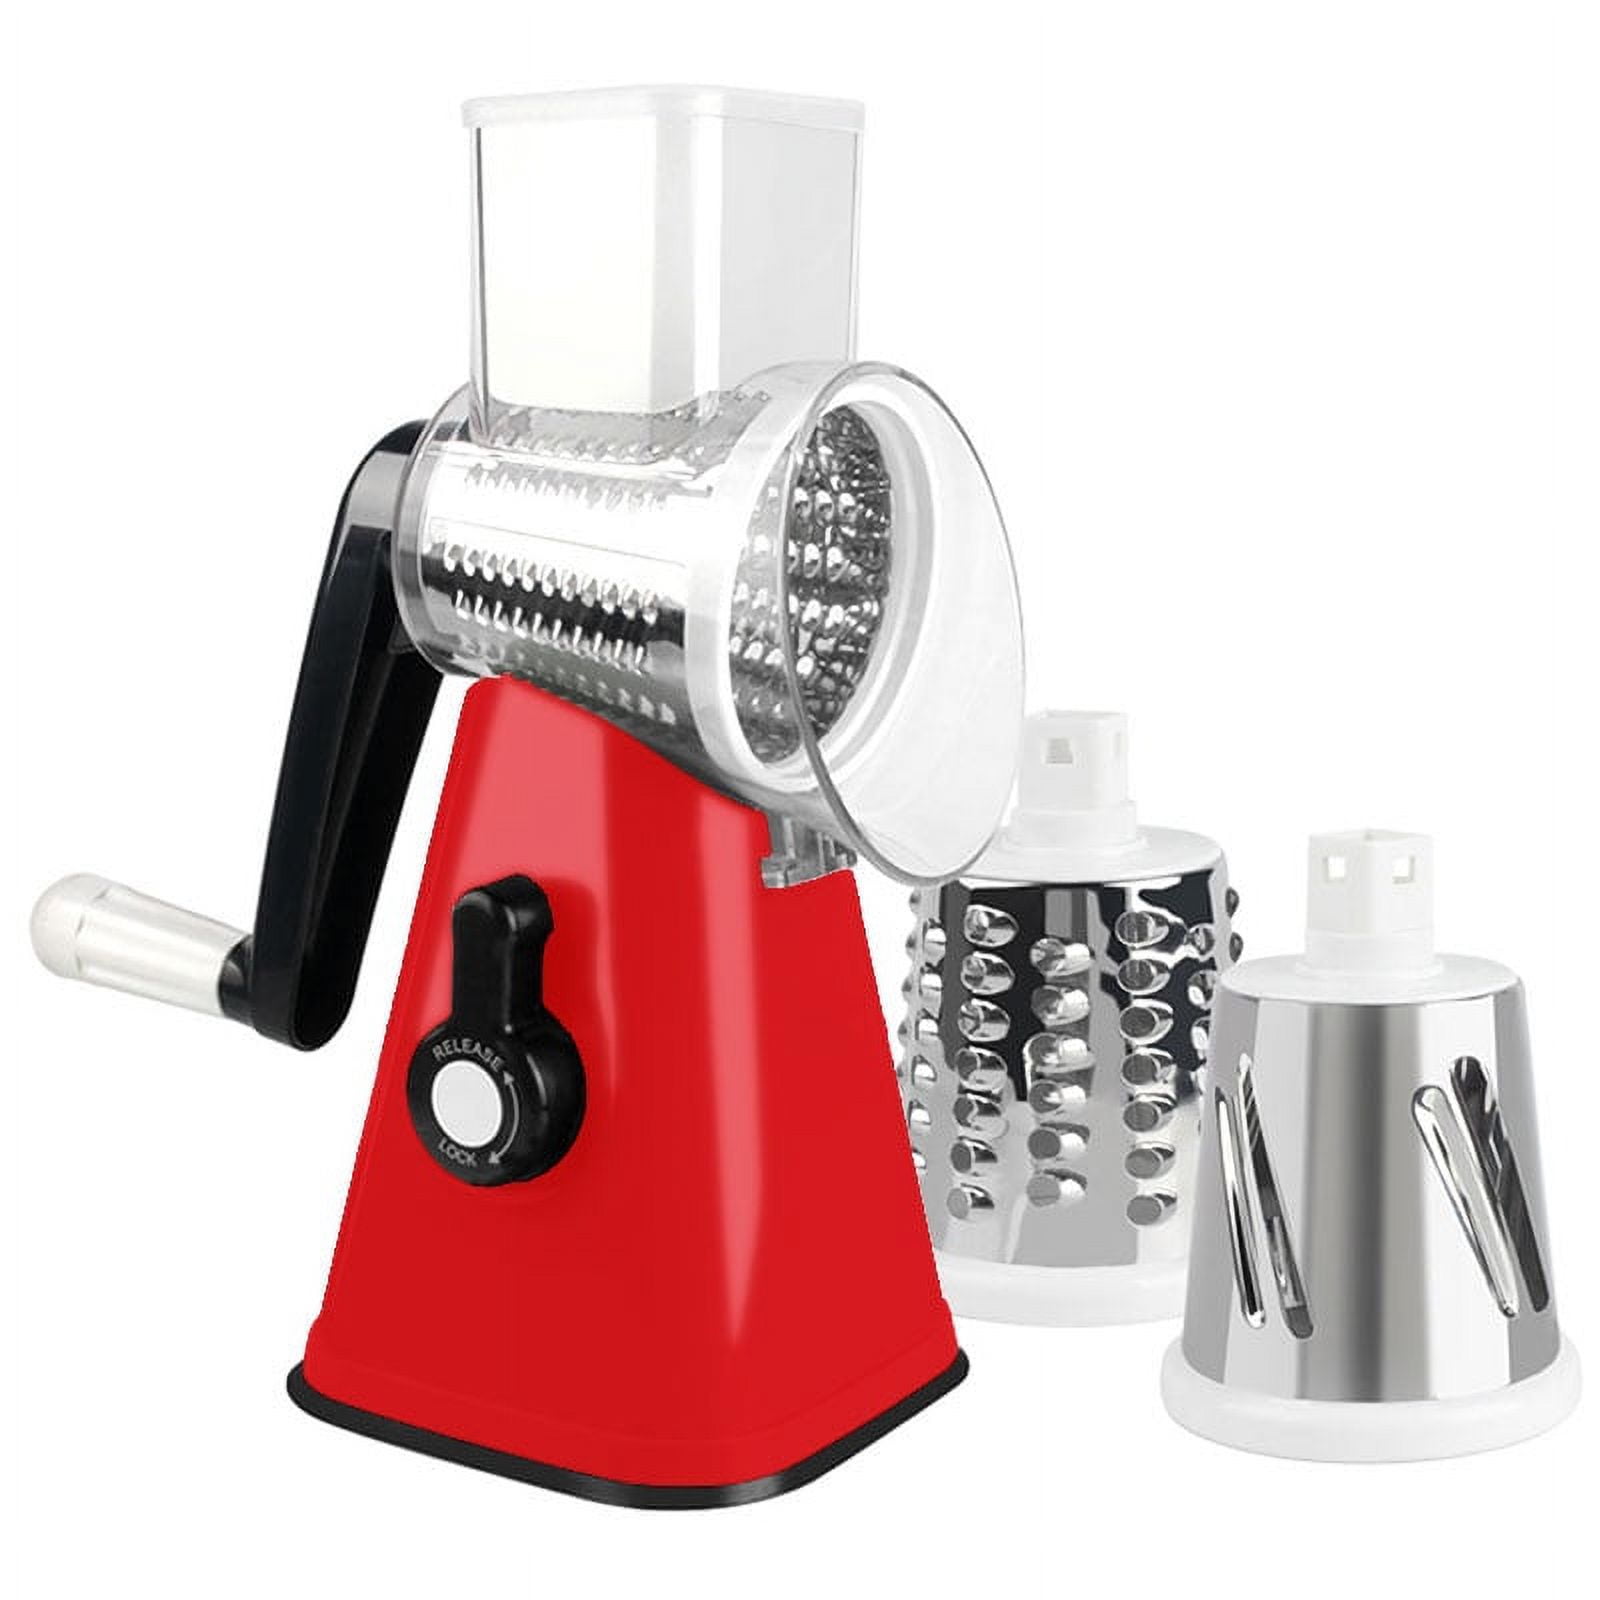 Cheese Grater,Large 4 in1 Manual Round Mandoline Slicer,Cheese